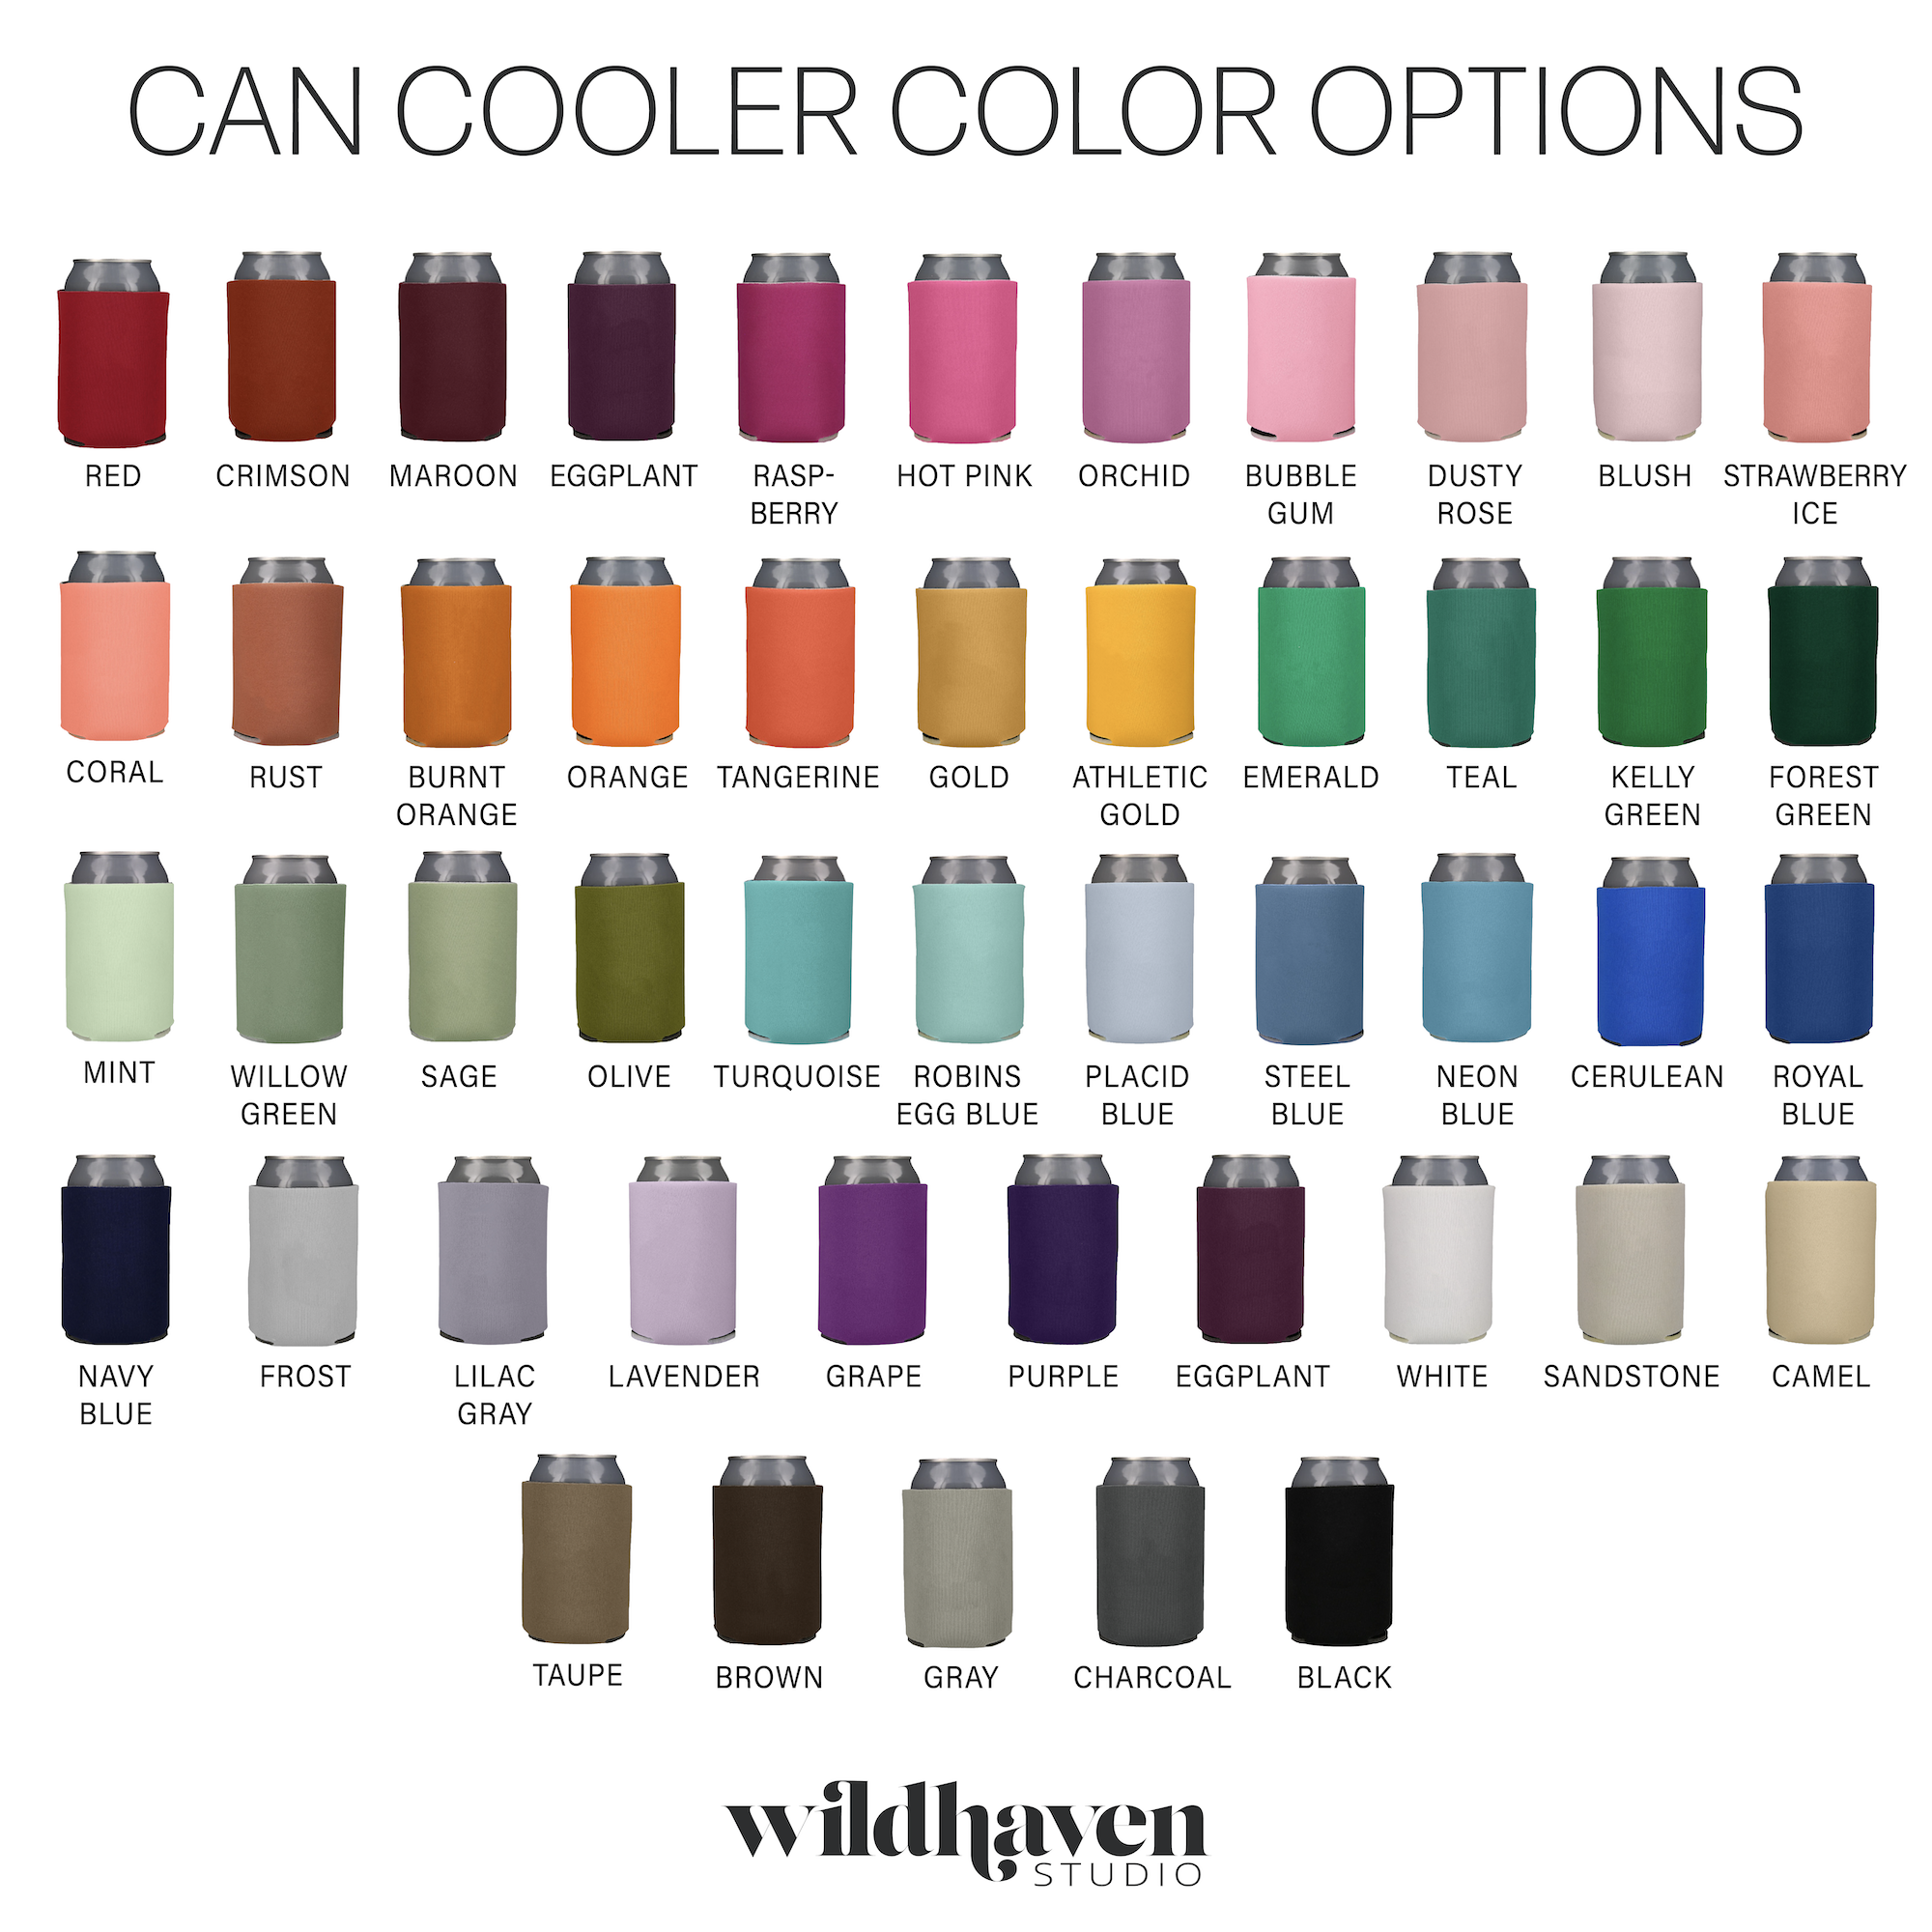 can cooler color options